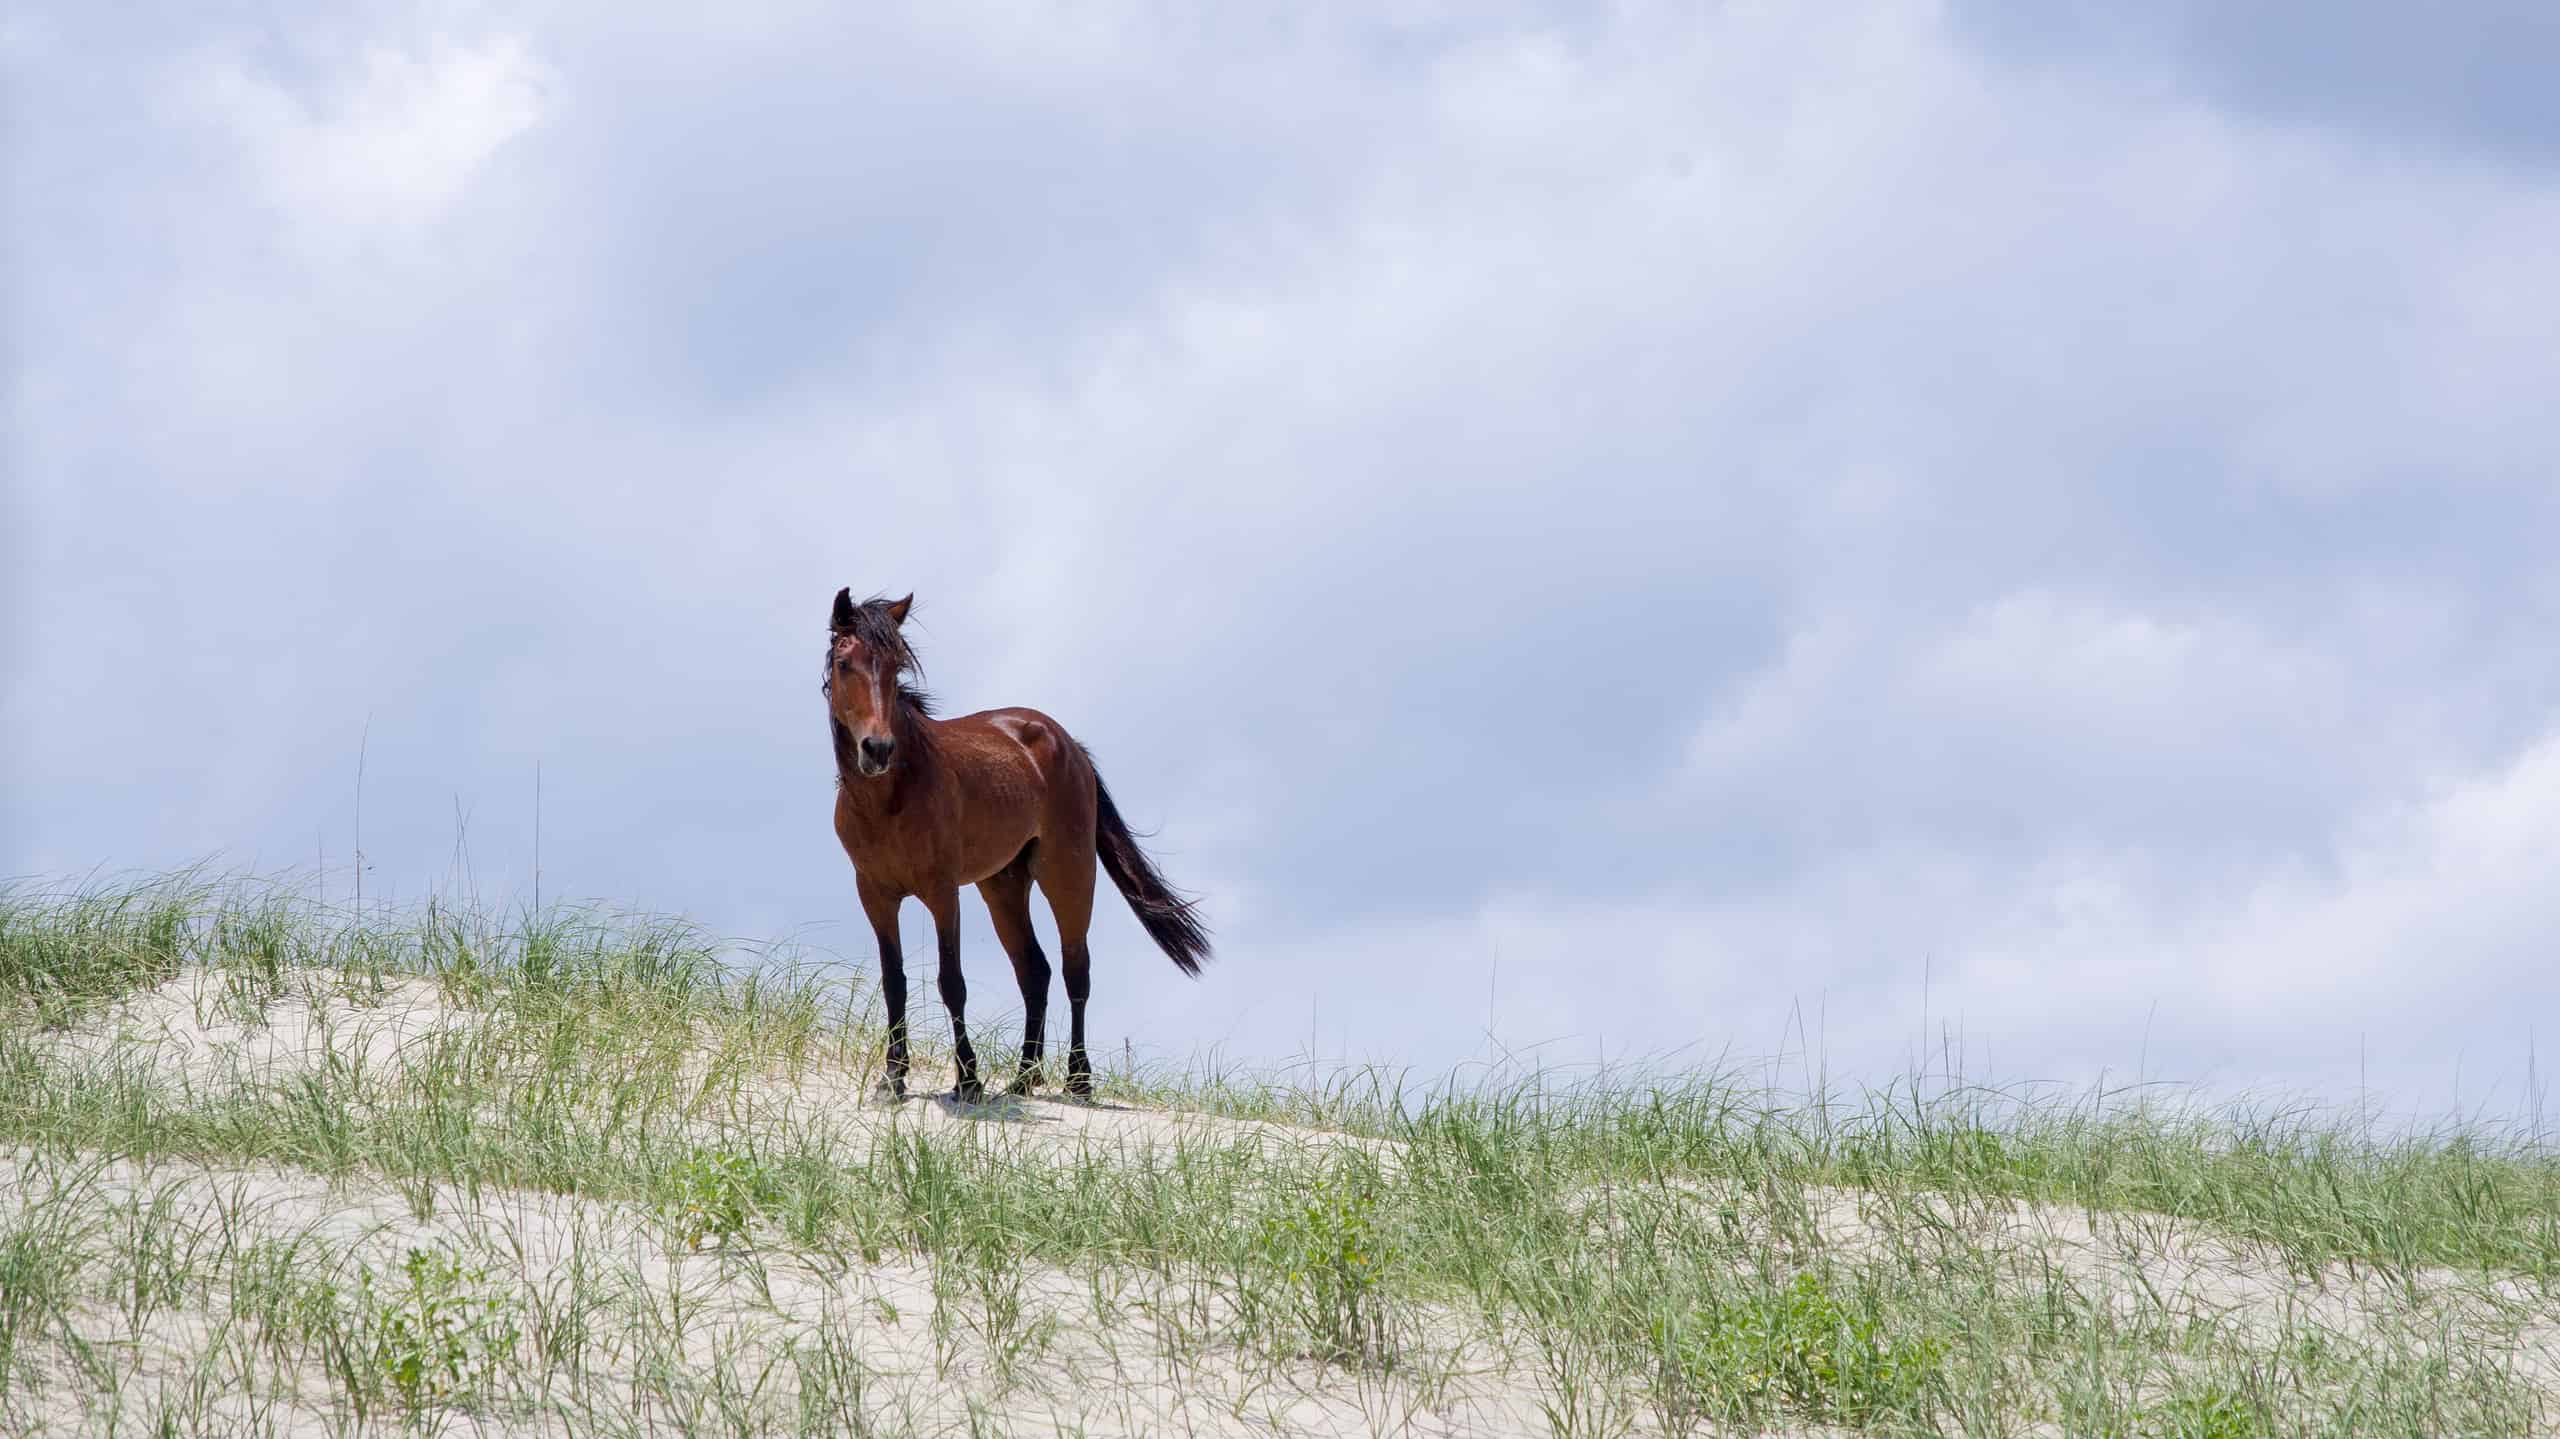 The wild Spanish Colonial Mustang is the state horse of North Carolina.